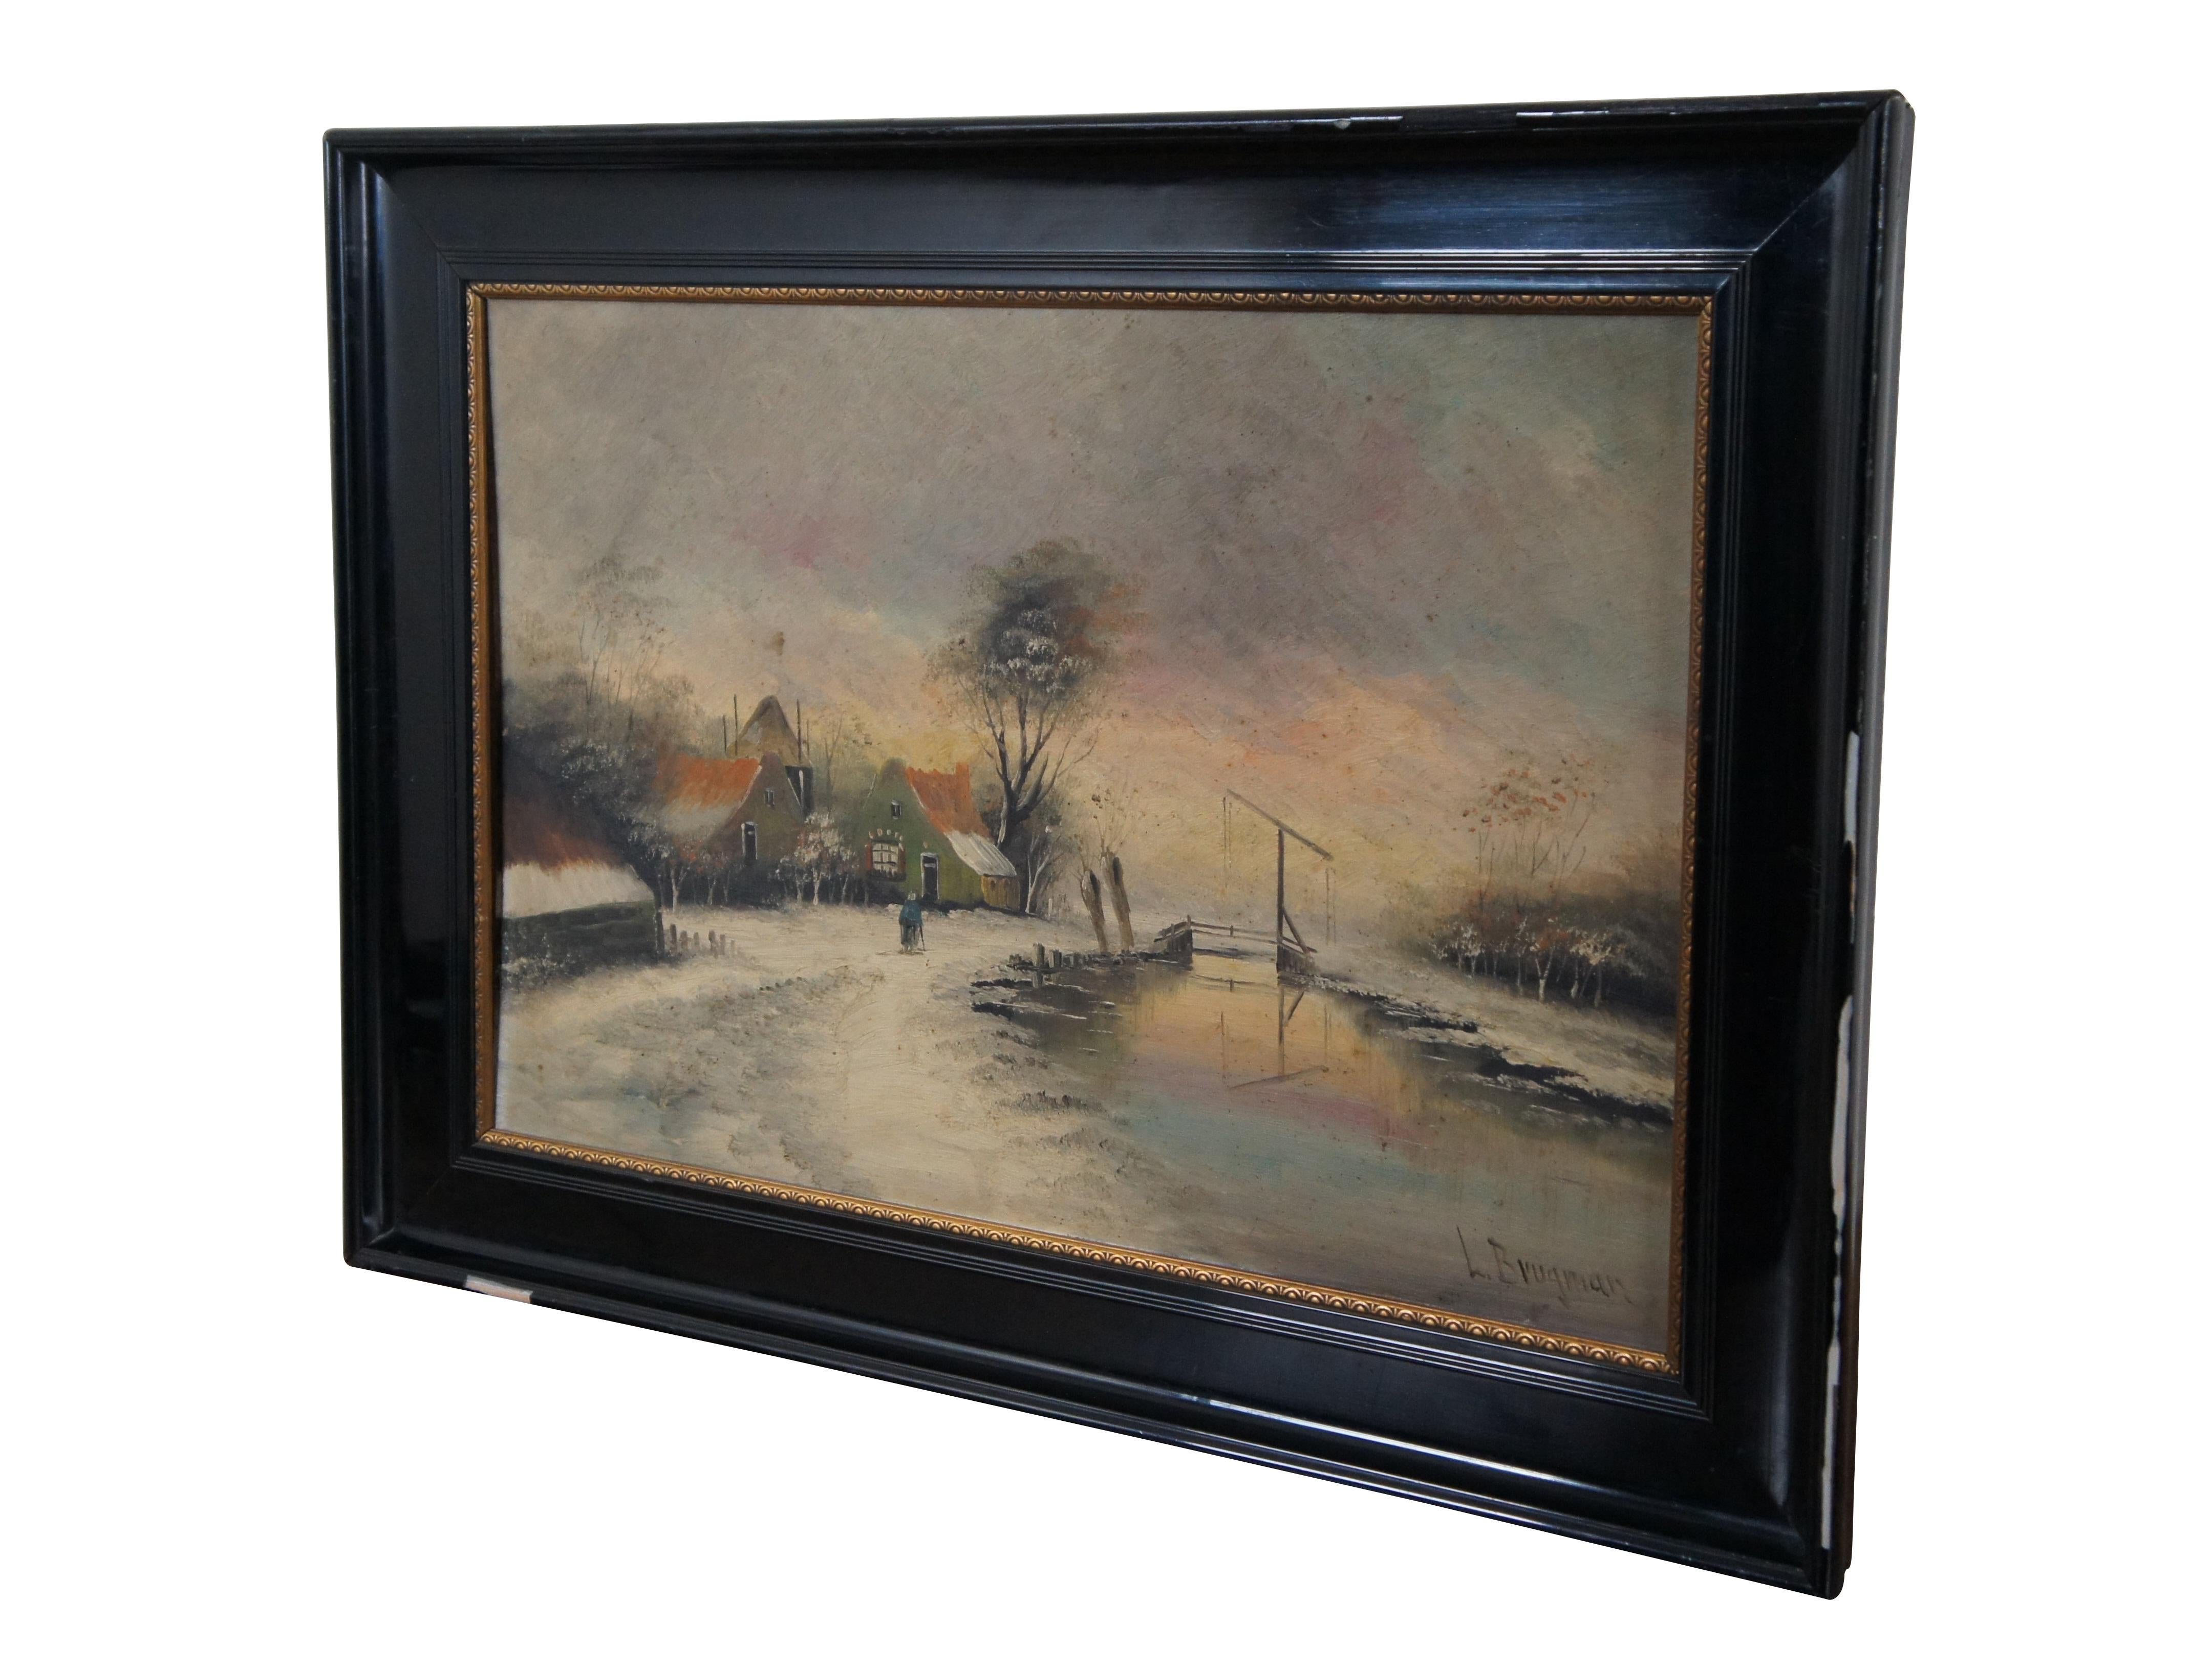 Vintage L Brugman oil painting on board featuring a snowy river landscape theme with a figure walking home.

Dimensions:.
29